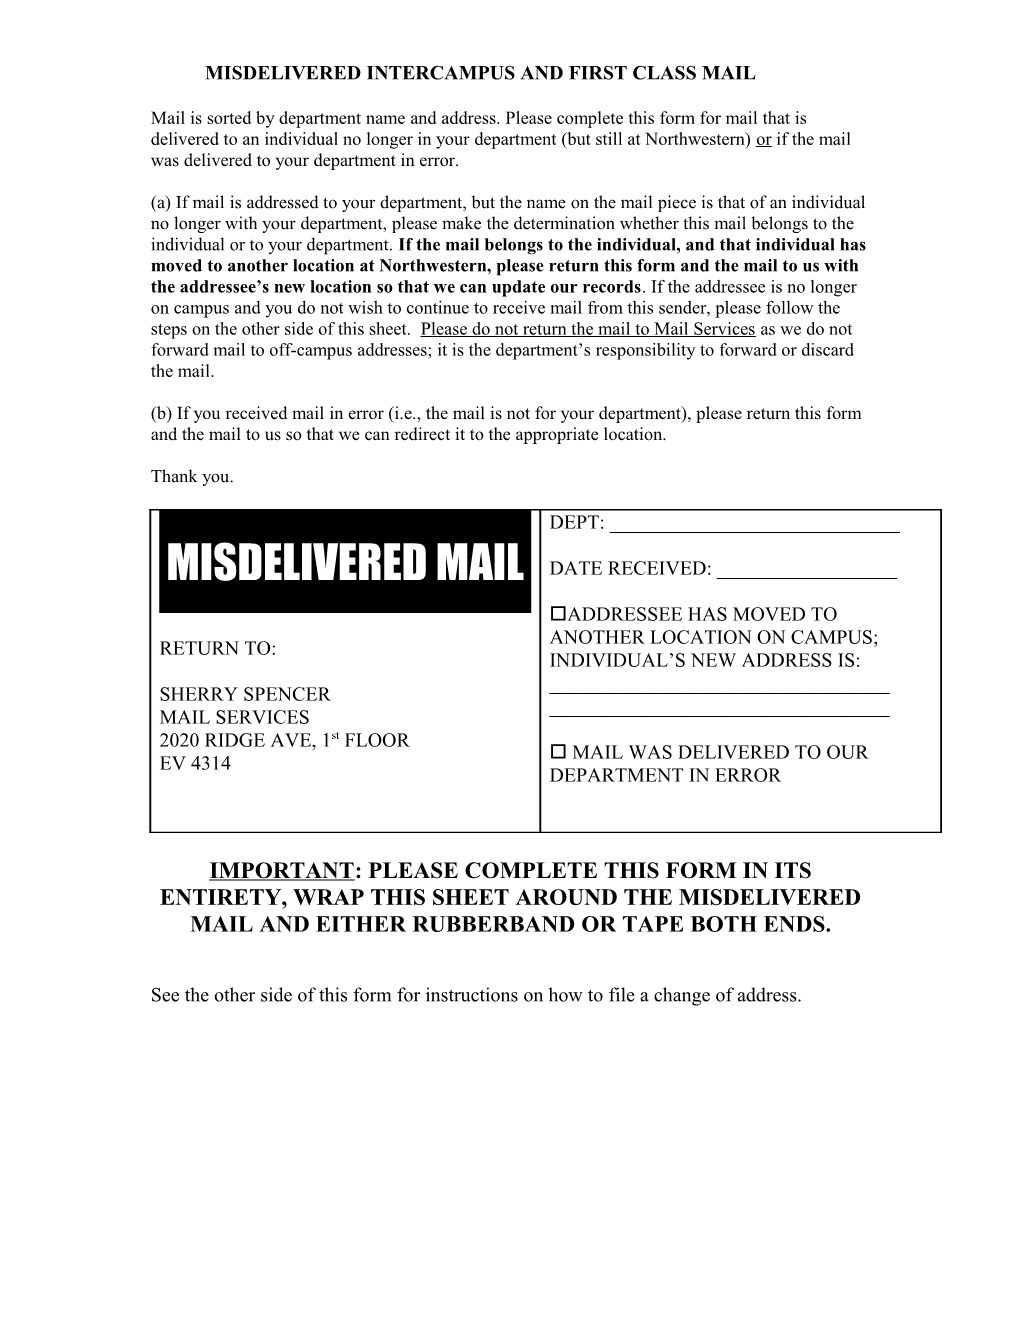 Misdelivered First Class Mail